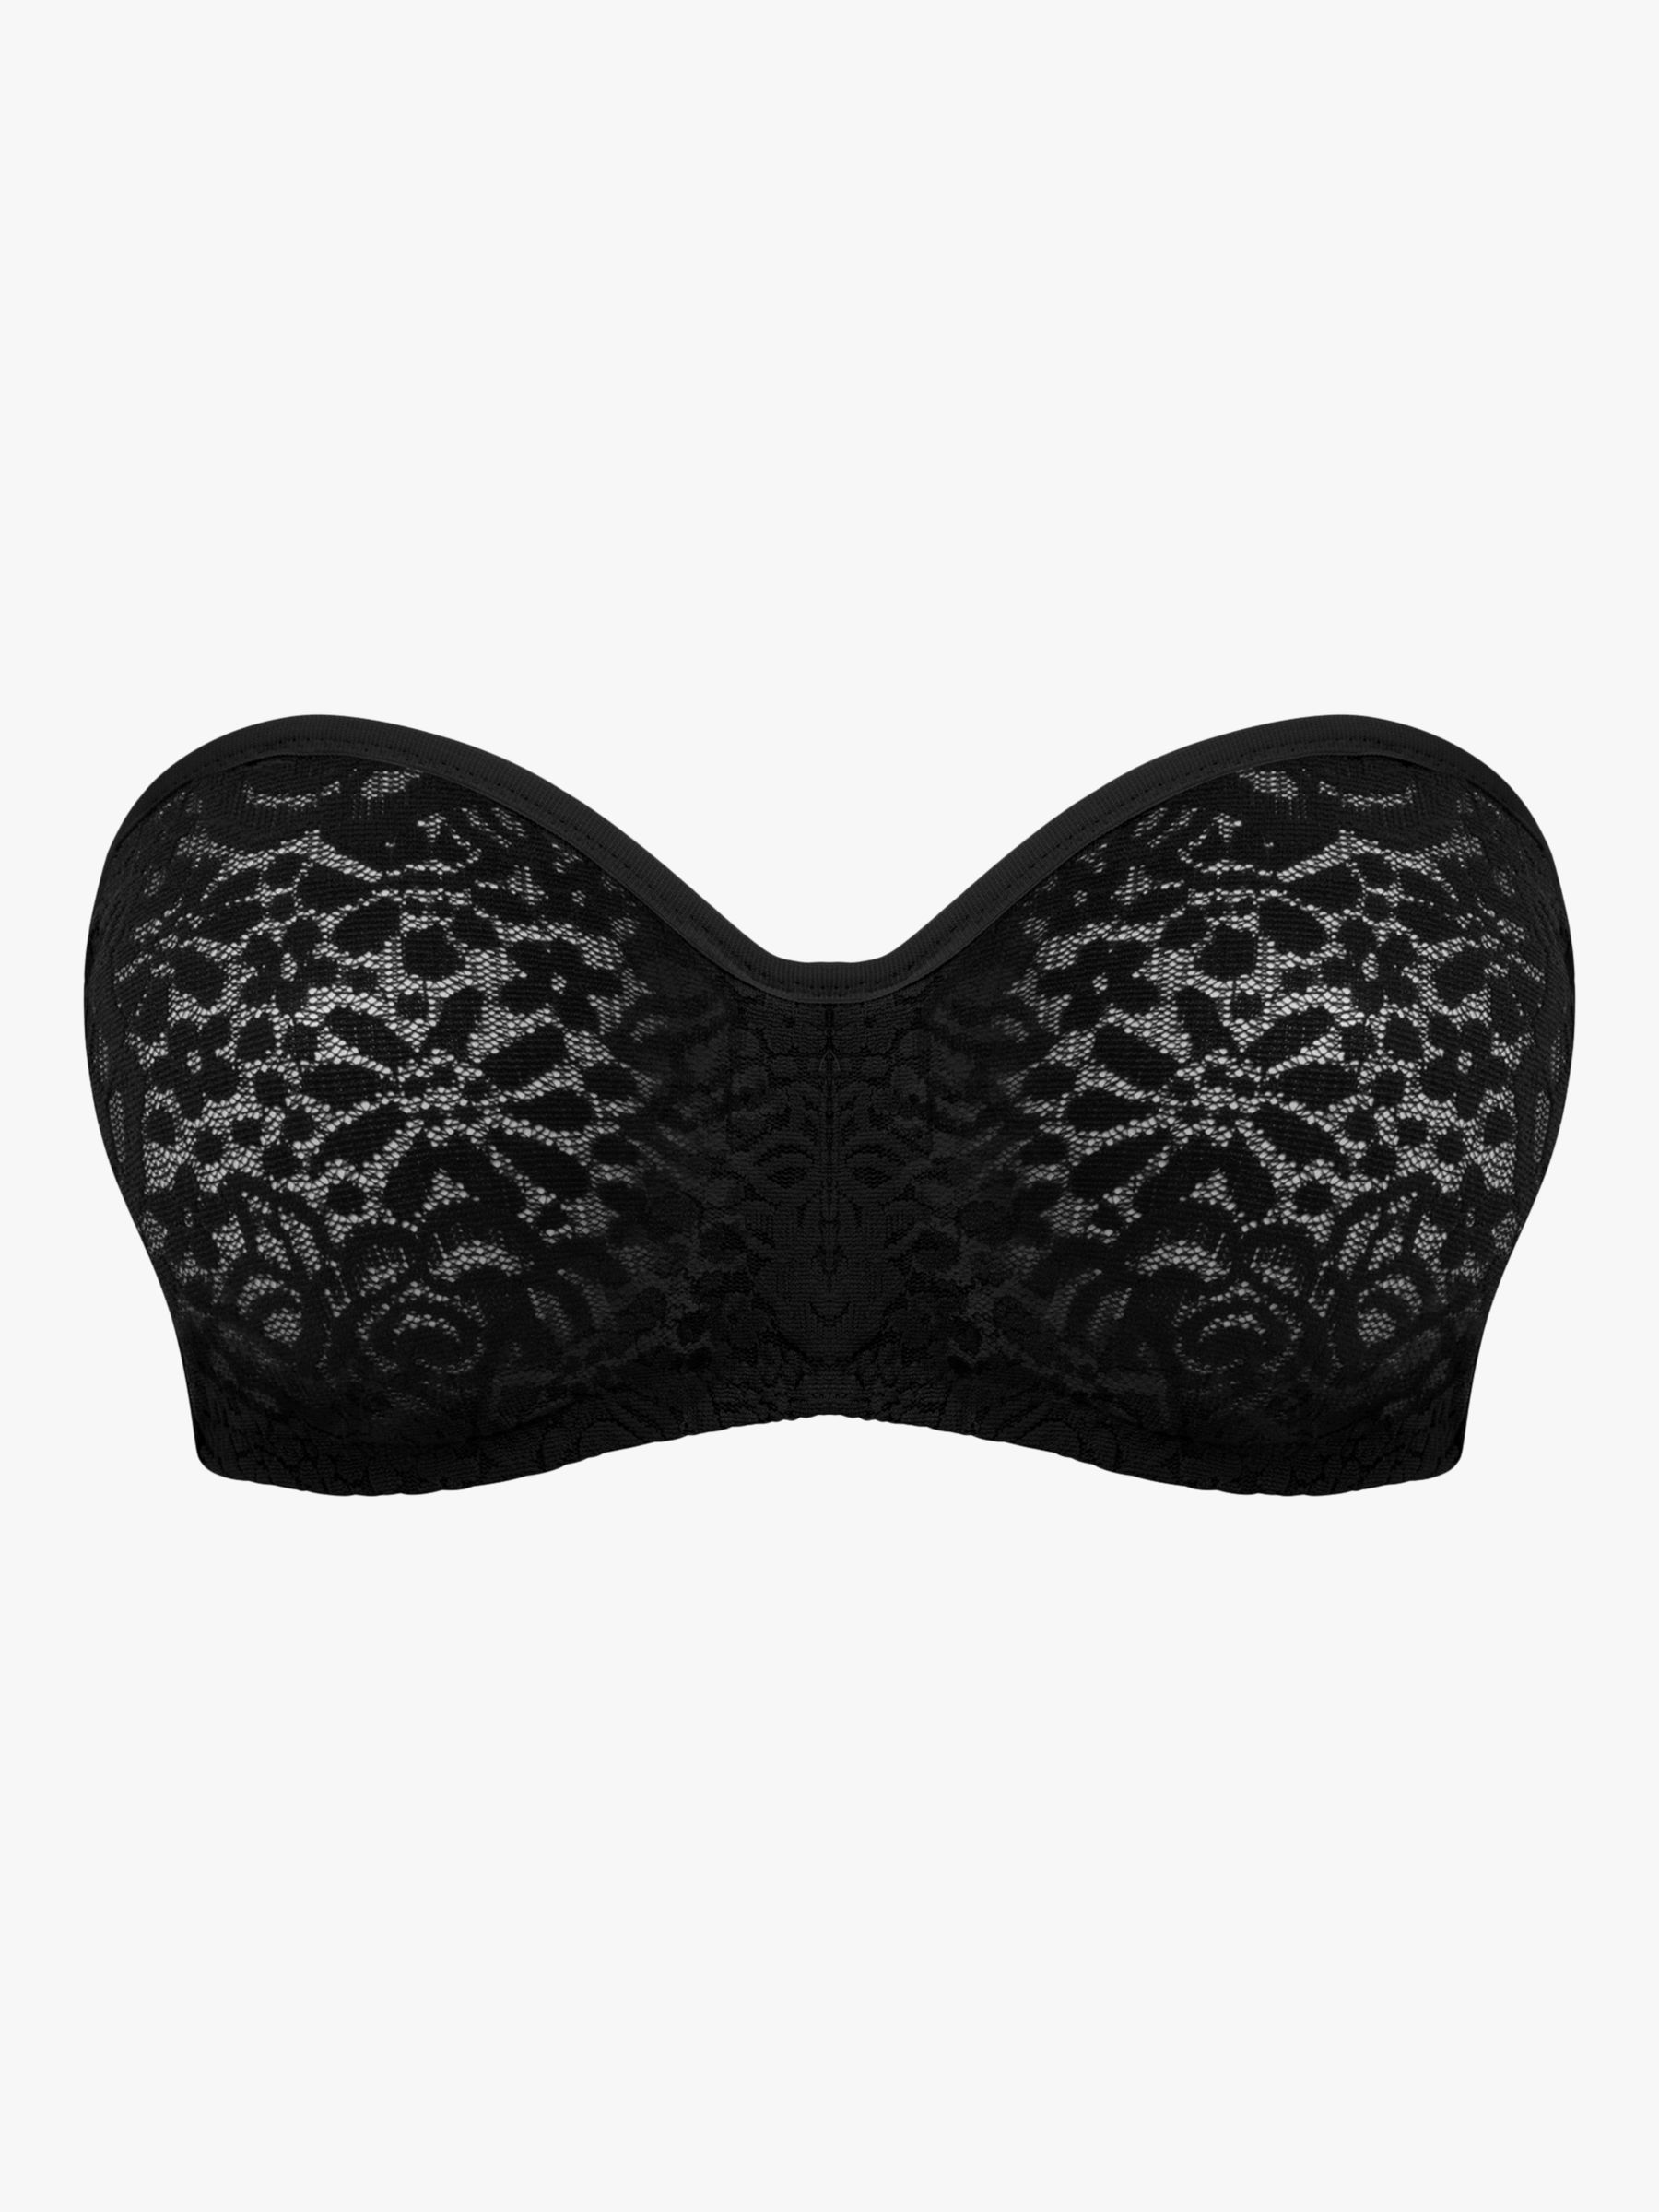 Halo Lace Black Moulded Bra from Wacoal